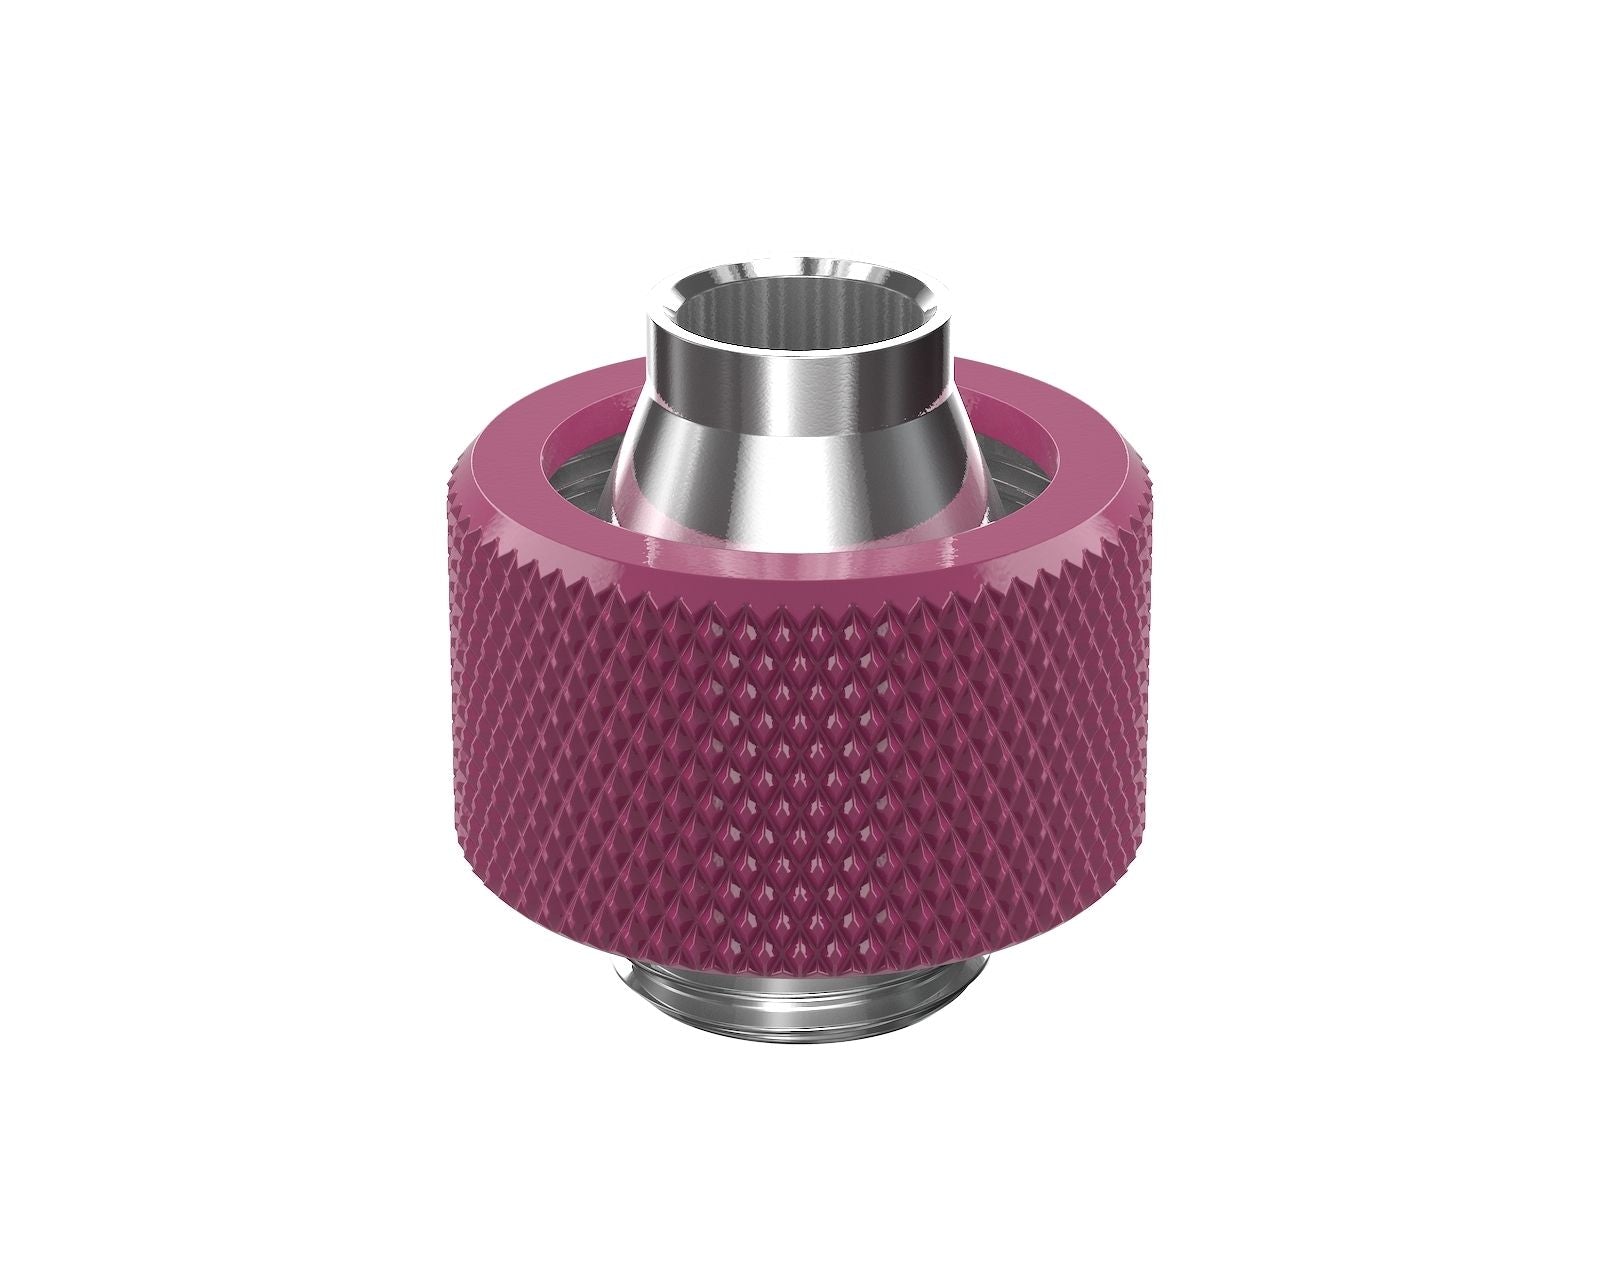 PrimoChill SecureFit SX - Premium Compression Fitting For 7/16in ID x 5/8in OD Flexible Tubing (F-SFSX758) - Available in 20+ Colors, Custom Watercooling Loop Ready - Magenta